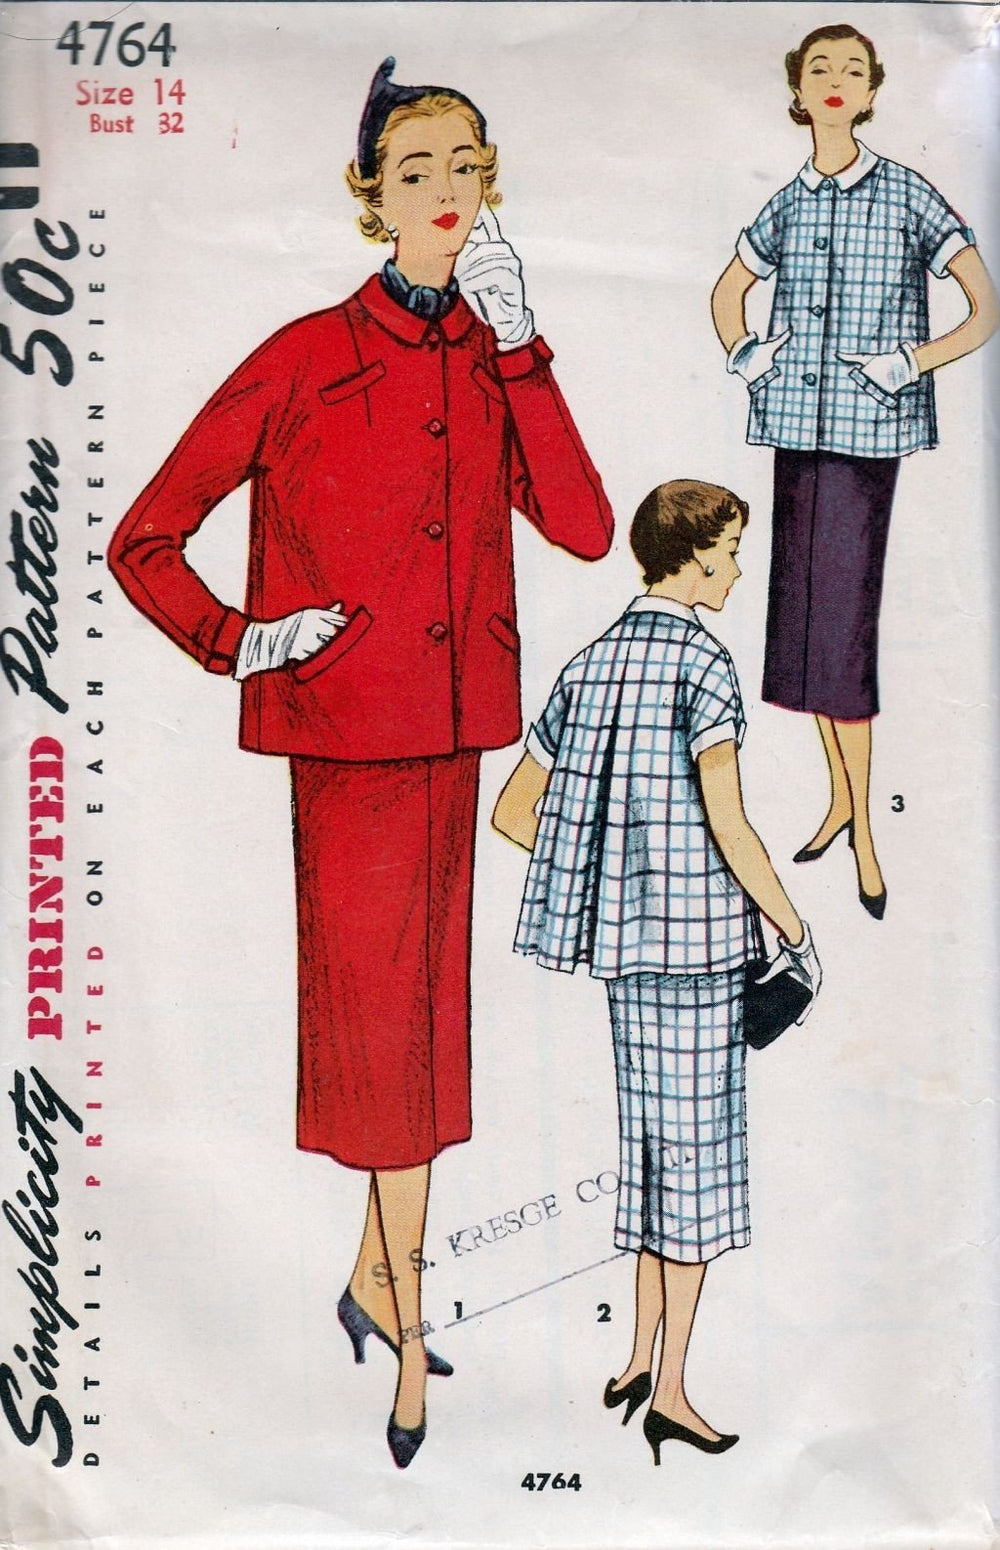 Simplicity 4764 Vintage 1950's Sewing Pattern Maternity Suit Jacket Inverted Pleat Skirt - VintageStitching - Vintage Sewing Patterns